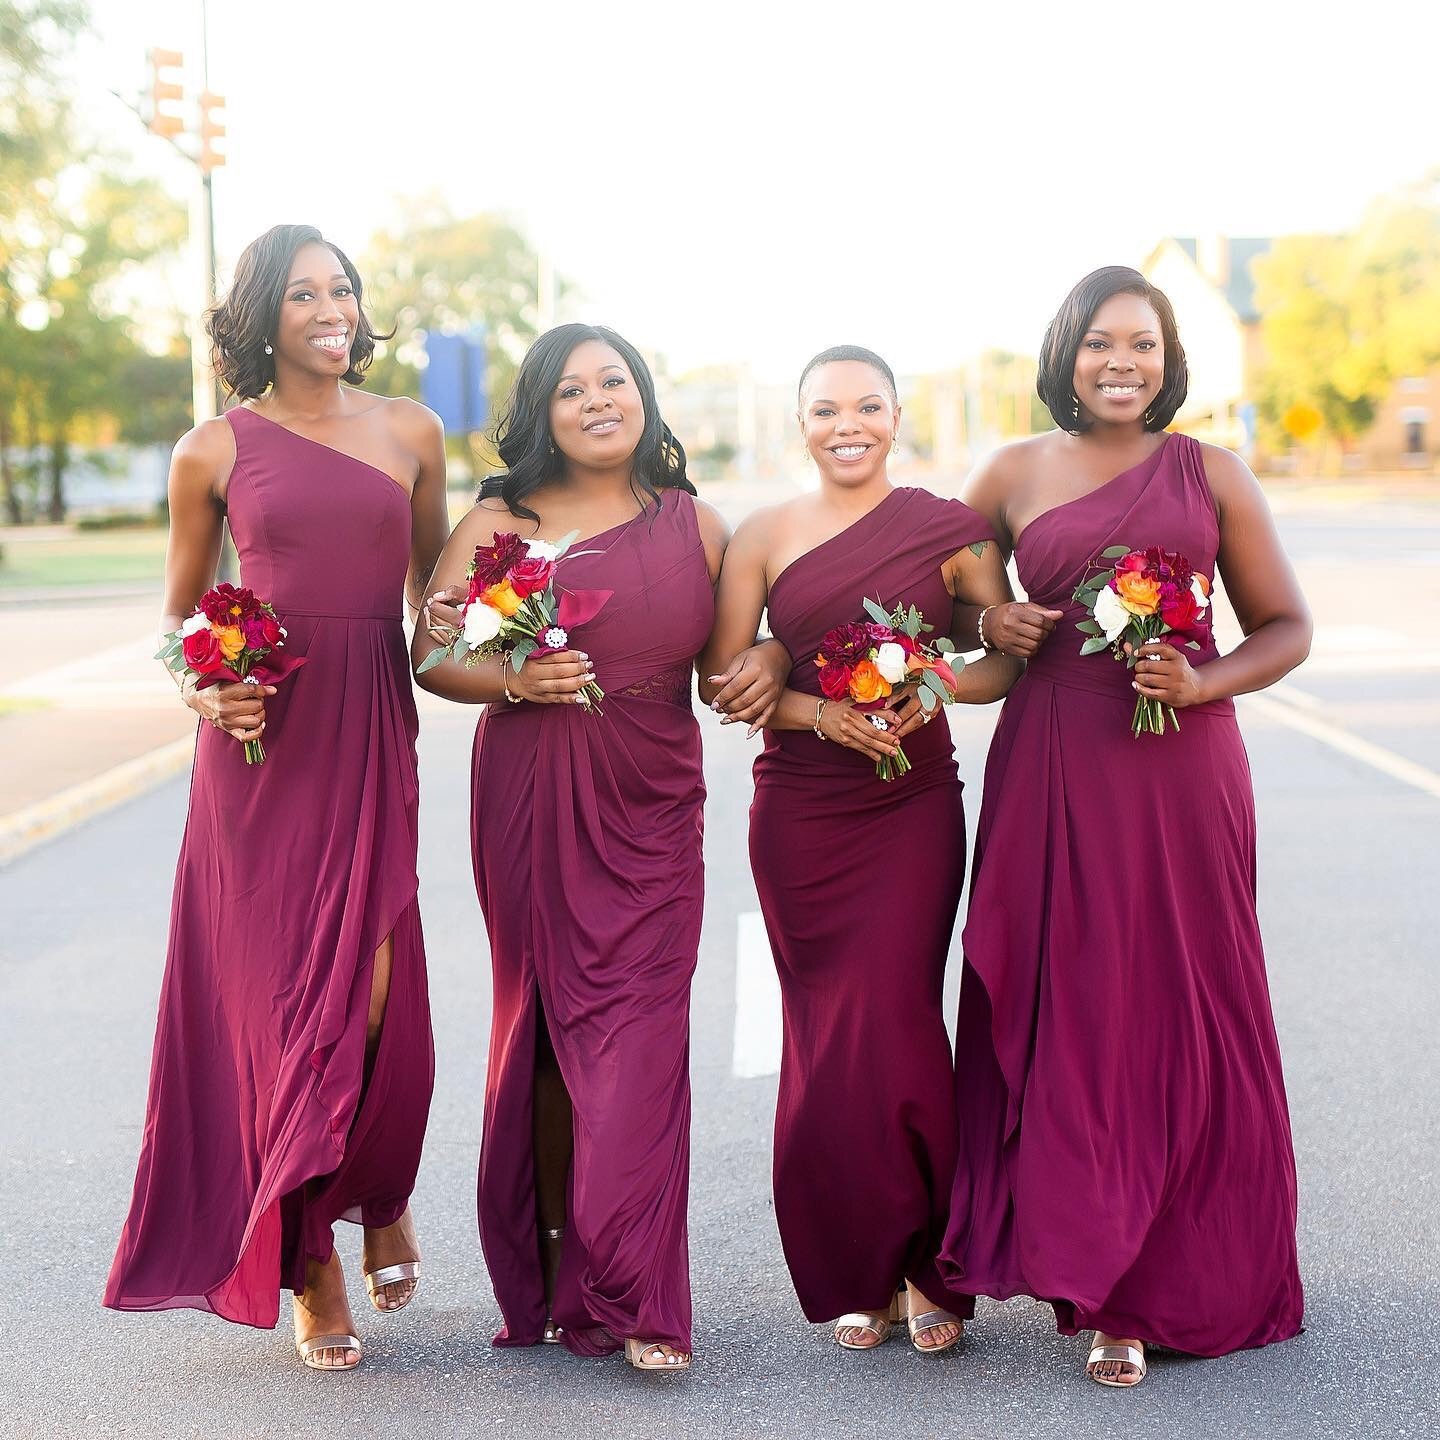 Bridal party in Wine bridesmaid dresses